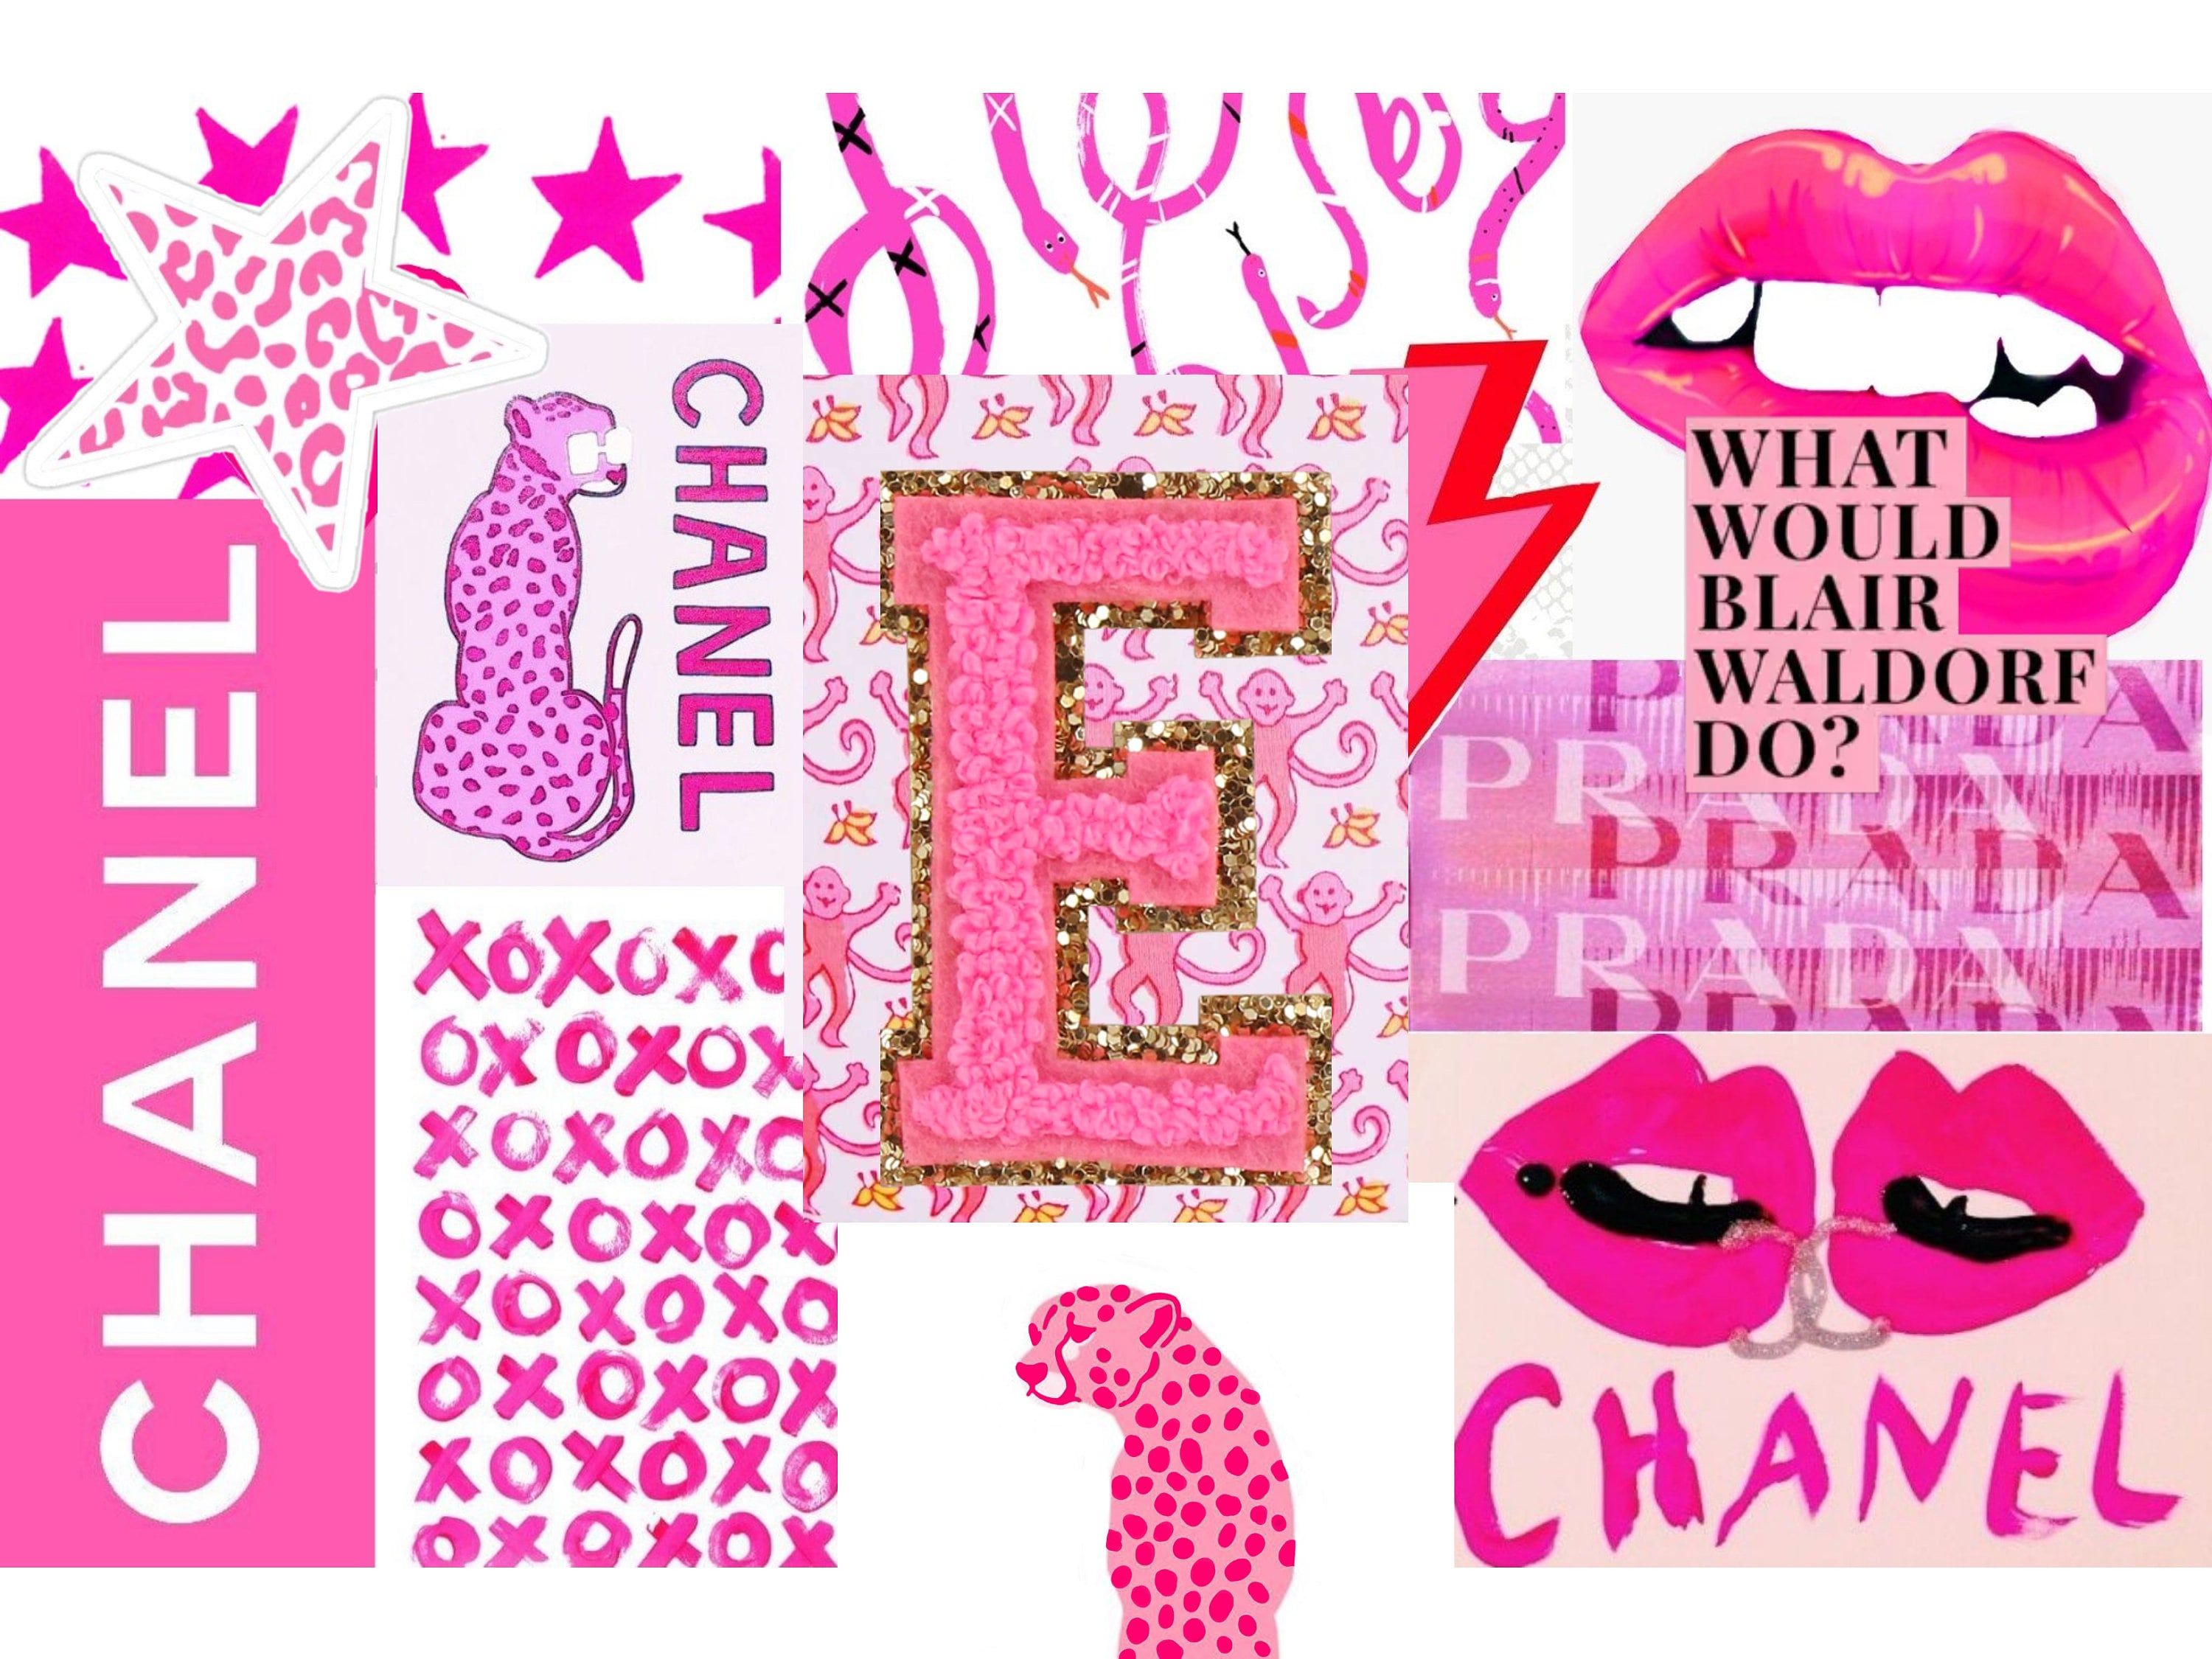 A collage of chanel, pink, and girly graphics - Preppy, Texas